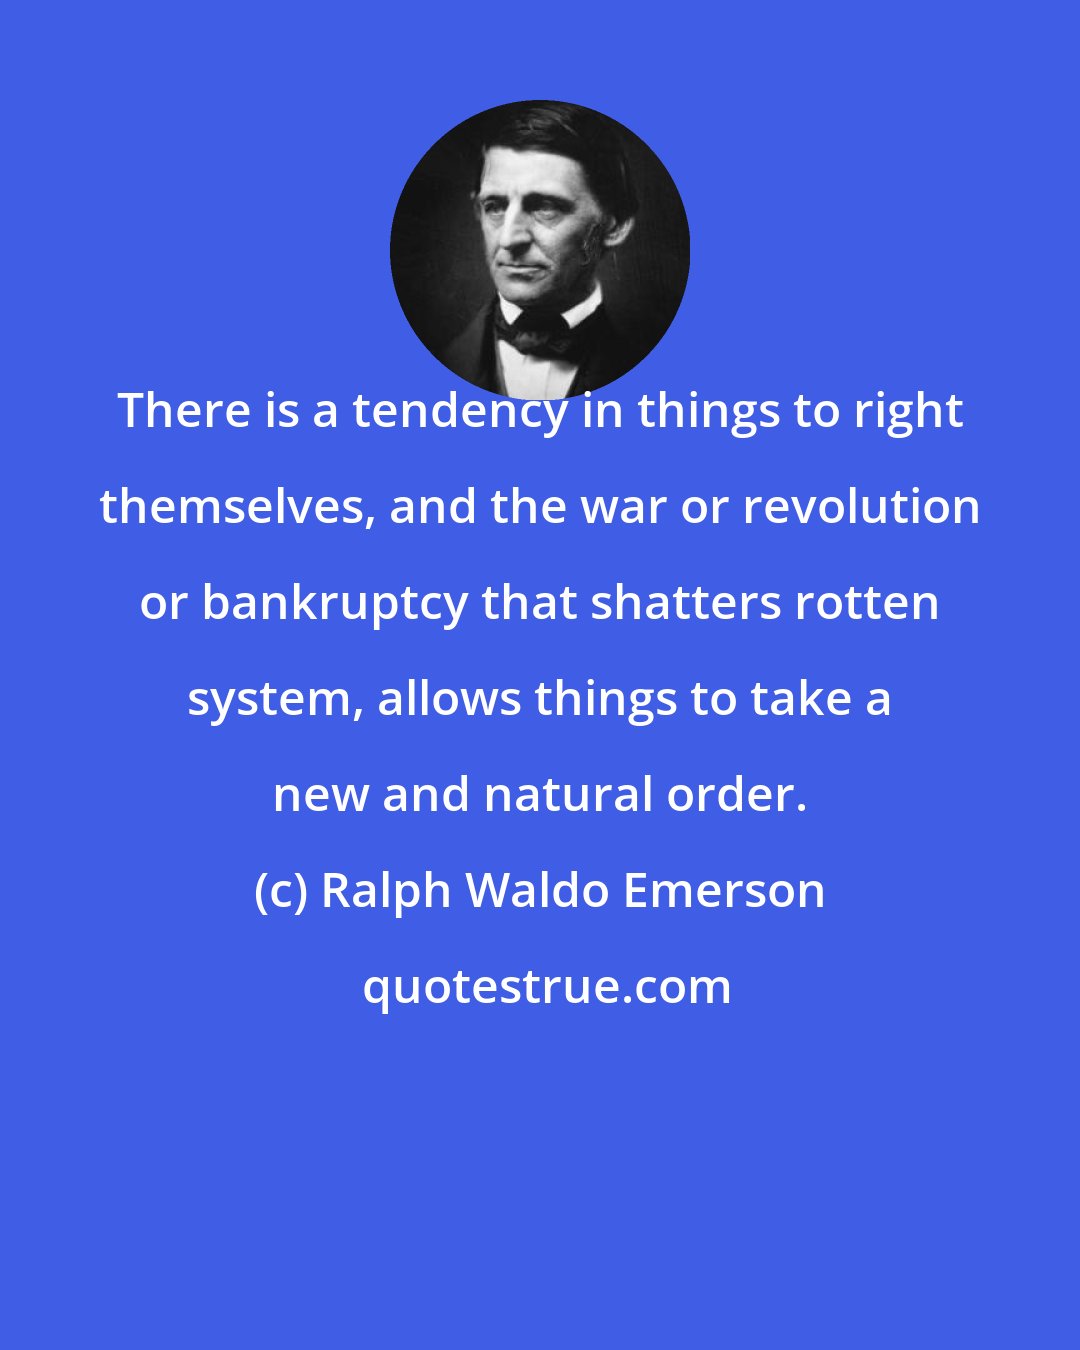 Ralph Waldo Emerson: There is a tendency in things to right themselves, and the war or revolution or bankruptcy that shatters rotten system, allows things to take a new and natural order.